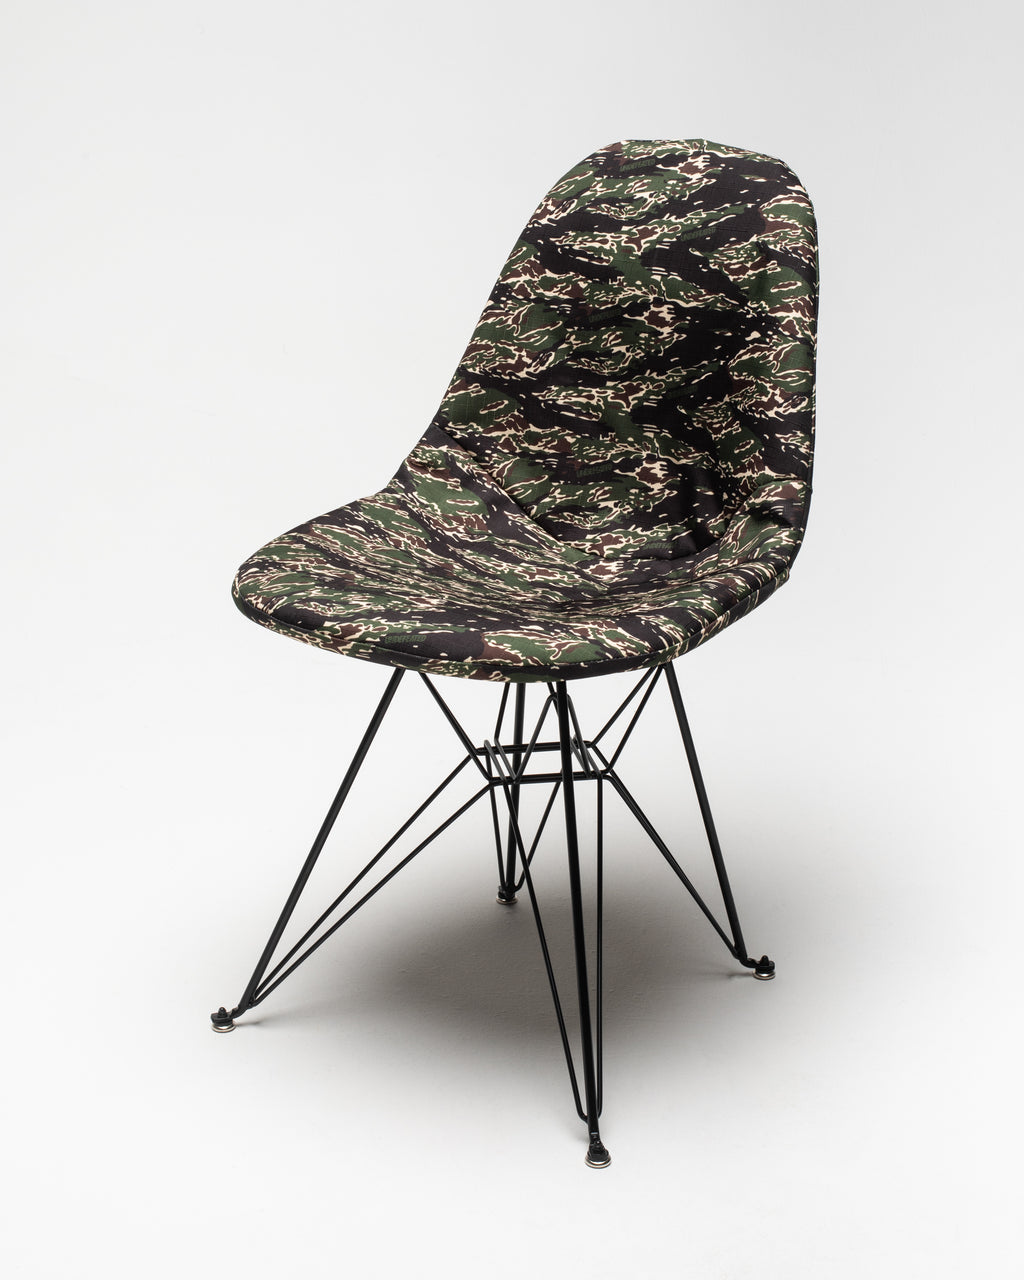 UNDEFEATED X MODERNICA SIDE SHELL EIFFEL CHAIR WITH CUSTOM COVER